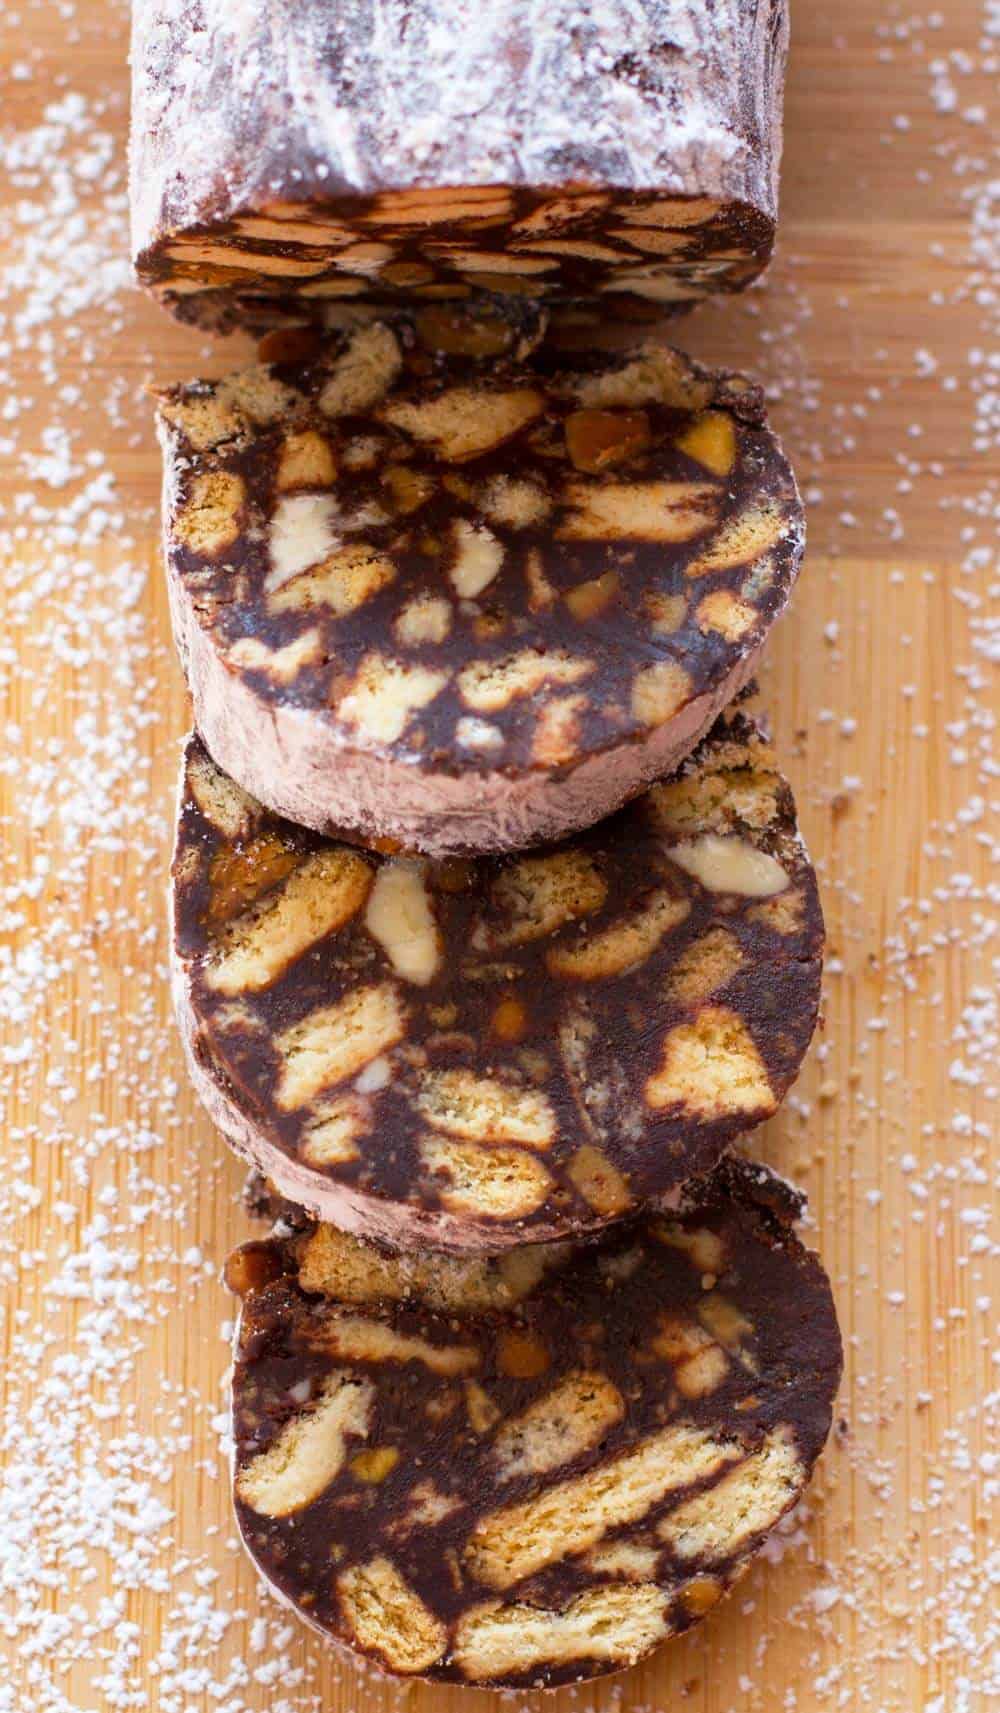 Chocolate salami - so delicious! This version from Mother Would Know